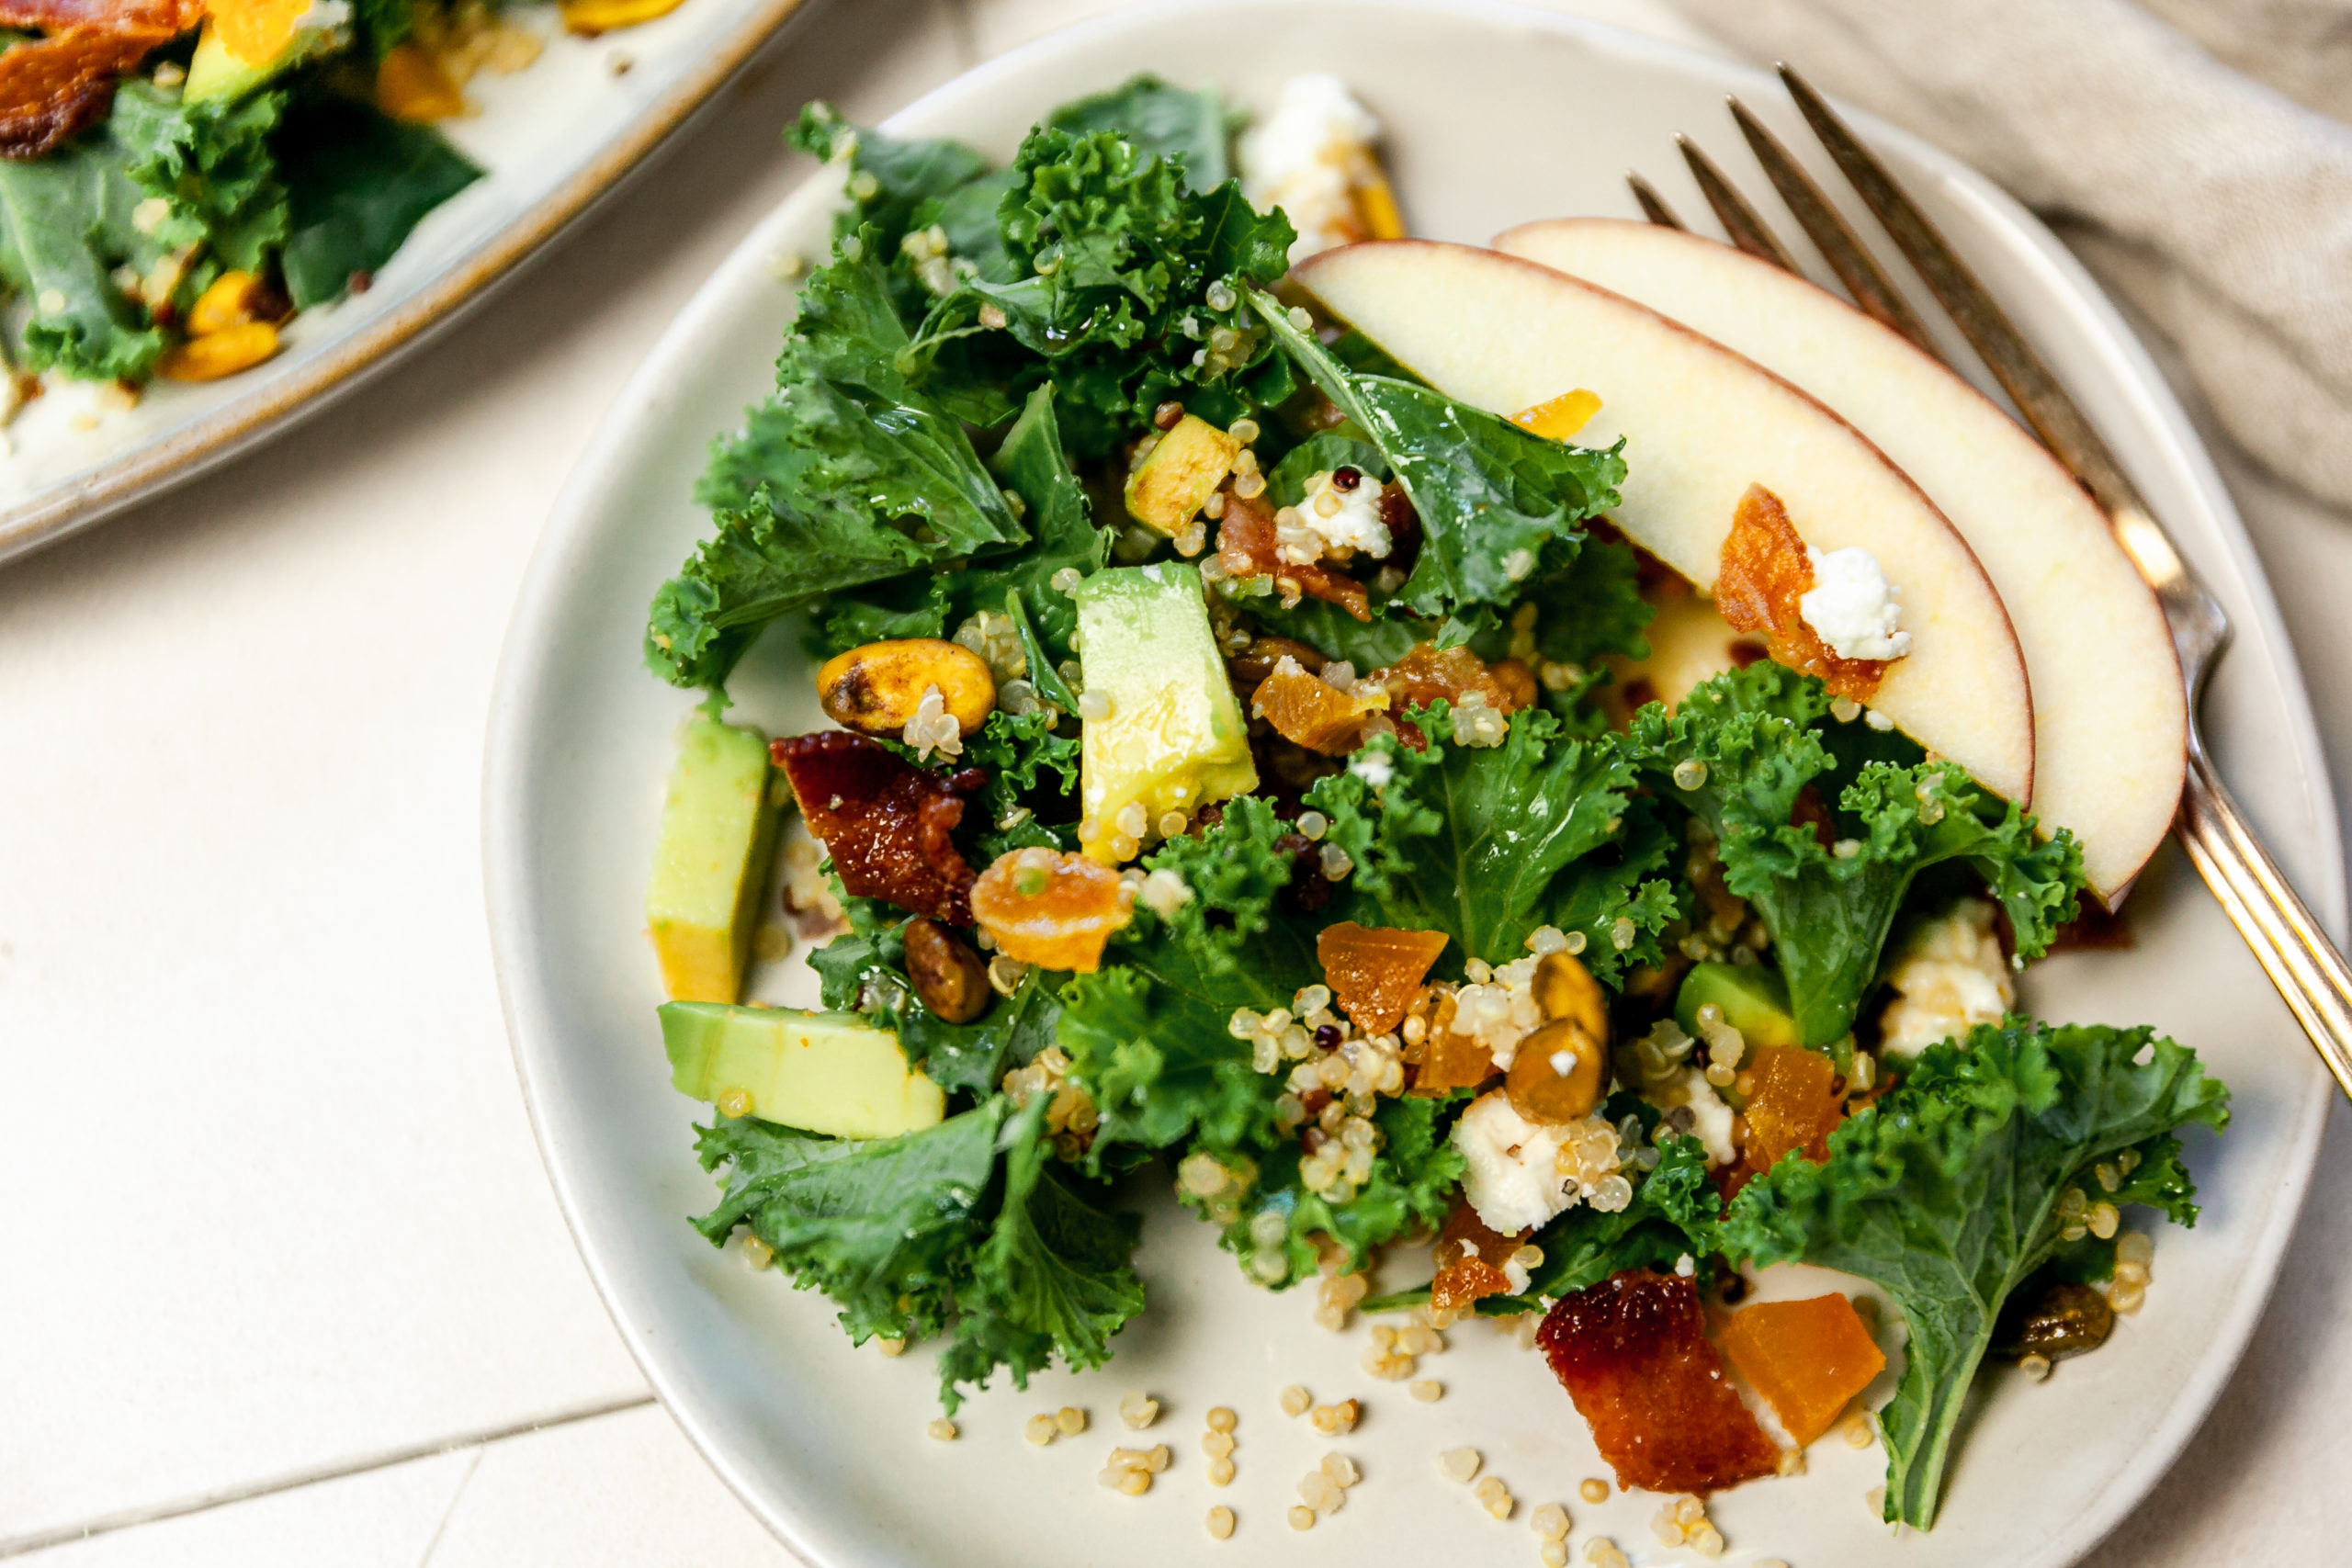 https://simplegardenkitchen.com/wp-content/uploads/2022/07/Kale-Quinoa-Salad-With-Avocado-Apricots-and-Bacon-Side-Salad-Simple-Garden-Kitchen-scaled.jpg